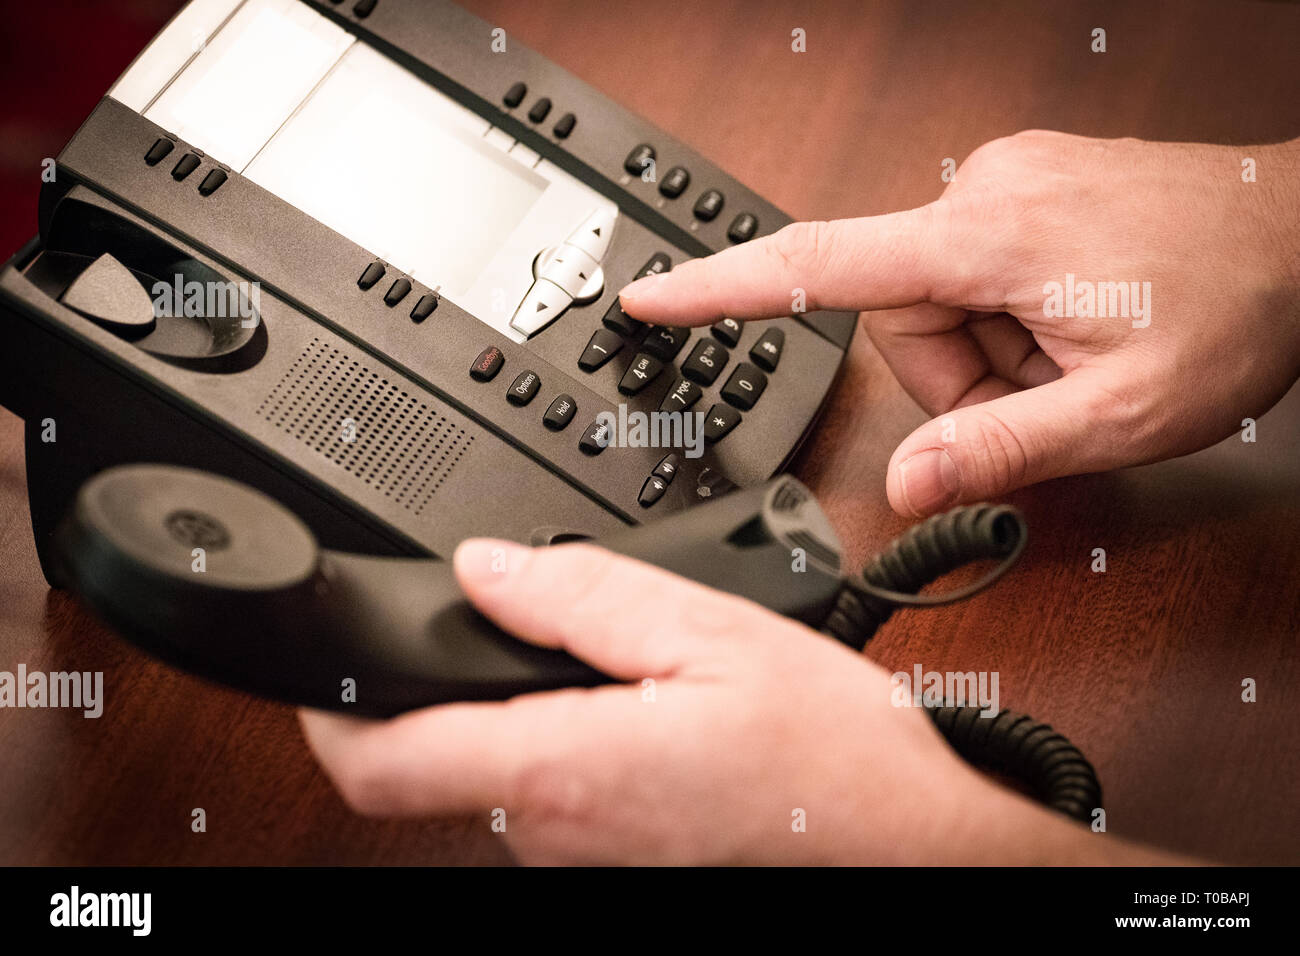 Finger dialing phone call on touch tone telephone. Stock Photo